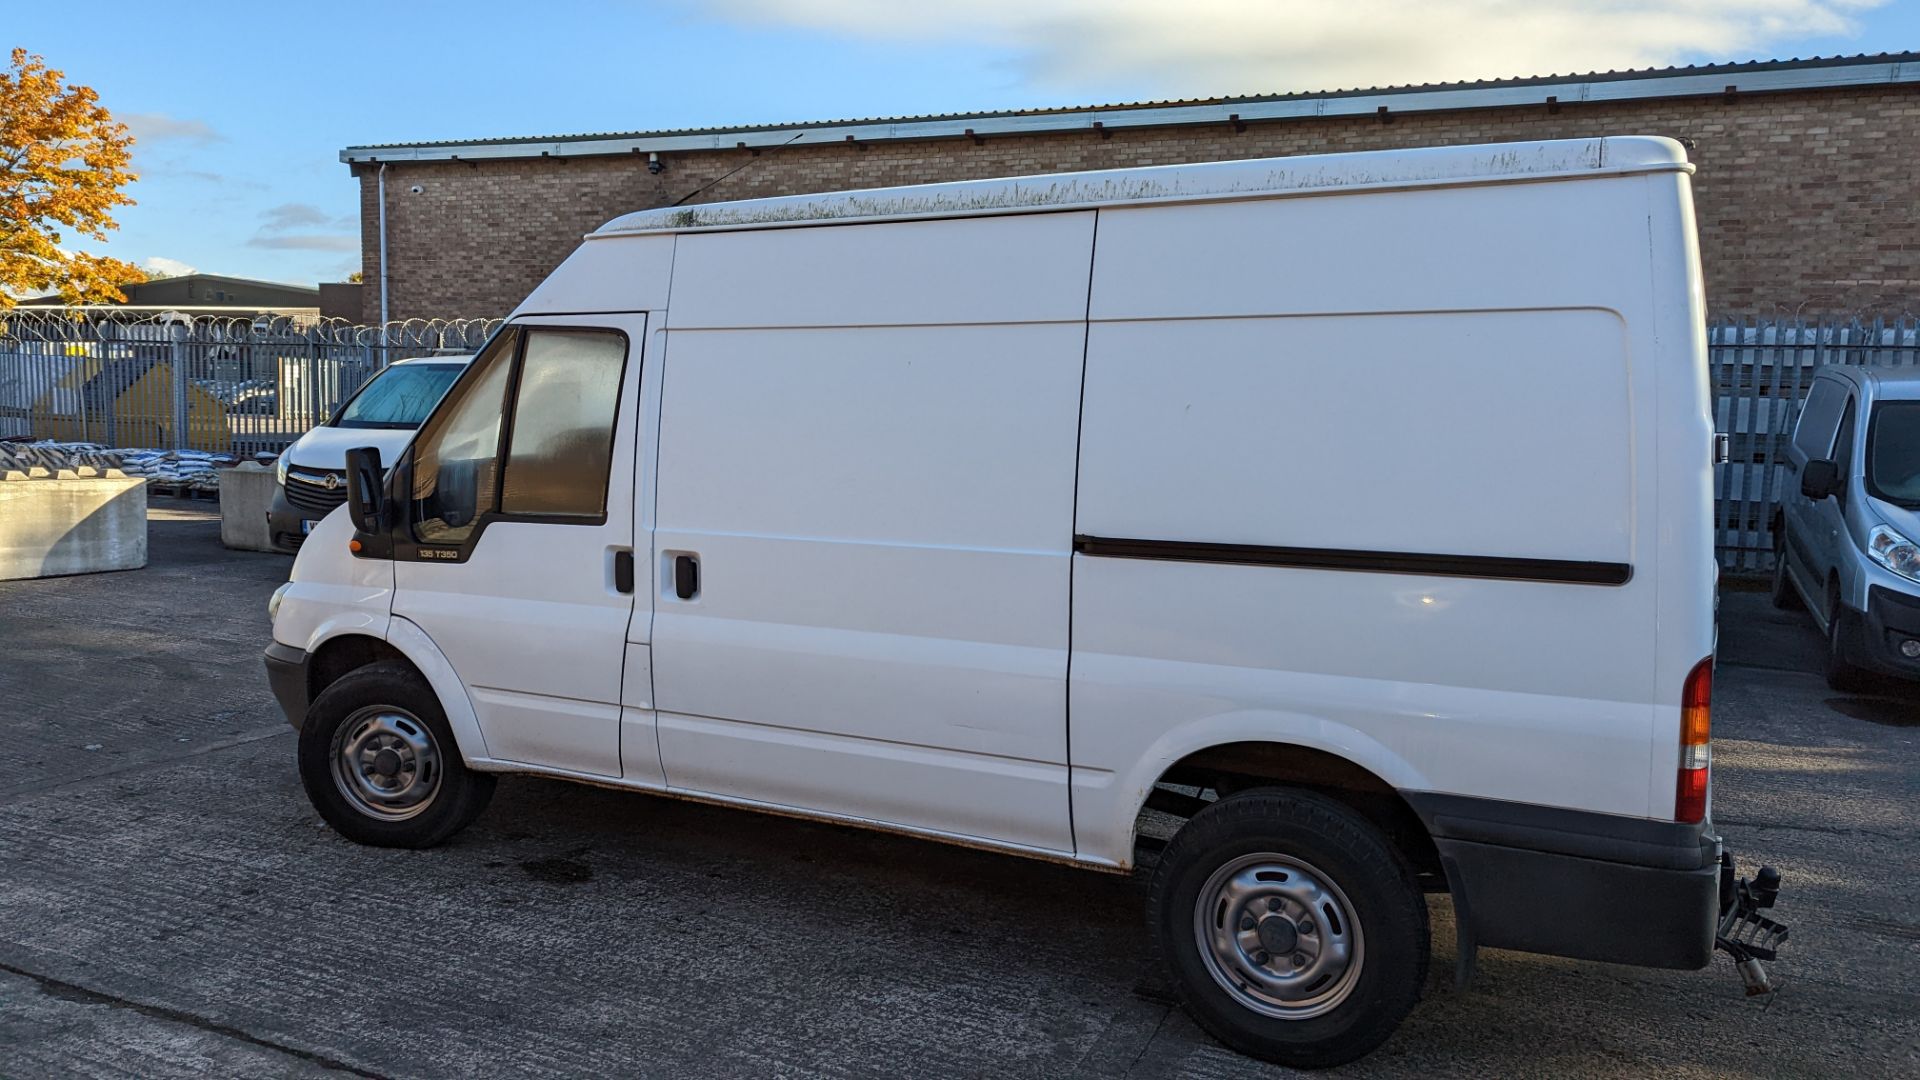 CU06 FBC Ford Transit panel van, 6 speed manual gearbox, 2402cc diesel engine. Colour: white. Fir - Image 17 of 44